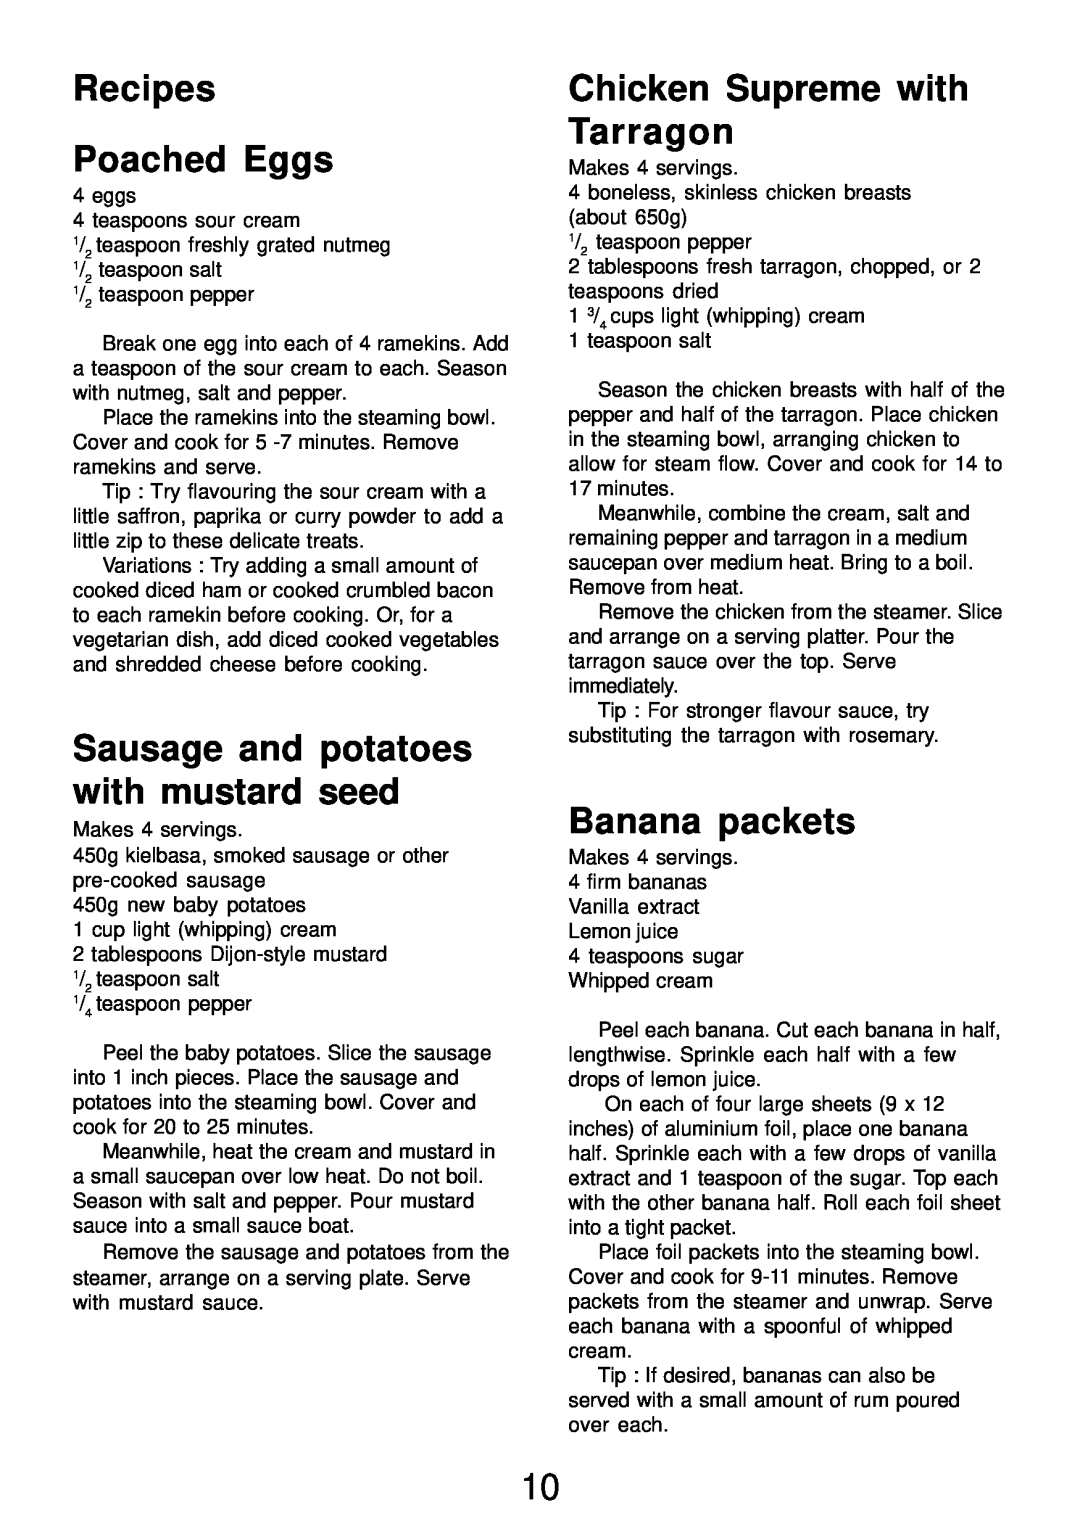 Morphy Richards Electric Steamer manual Recipes Poached Eggs, Sausage and potatoes with mustard seed, Banana packets 